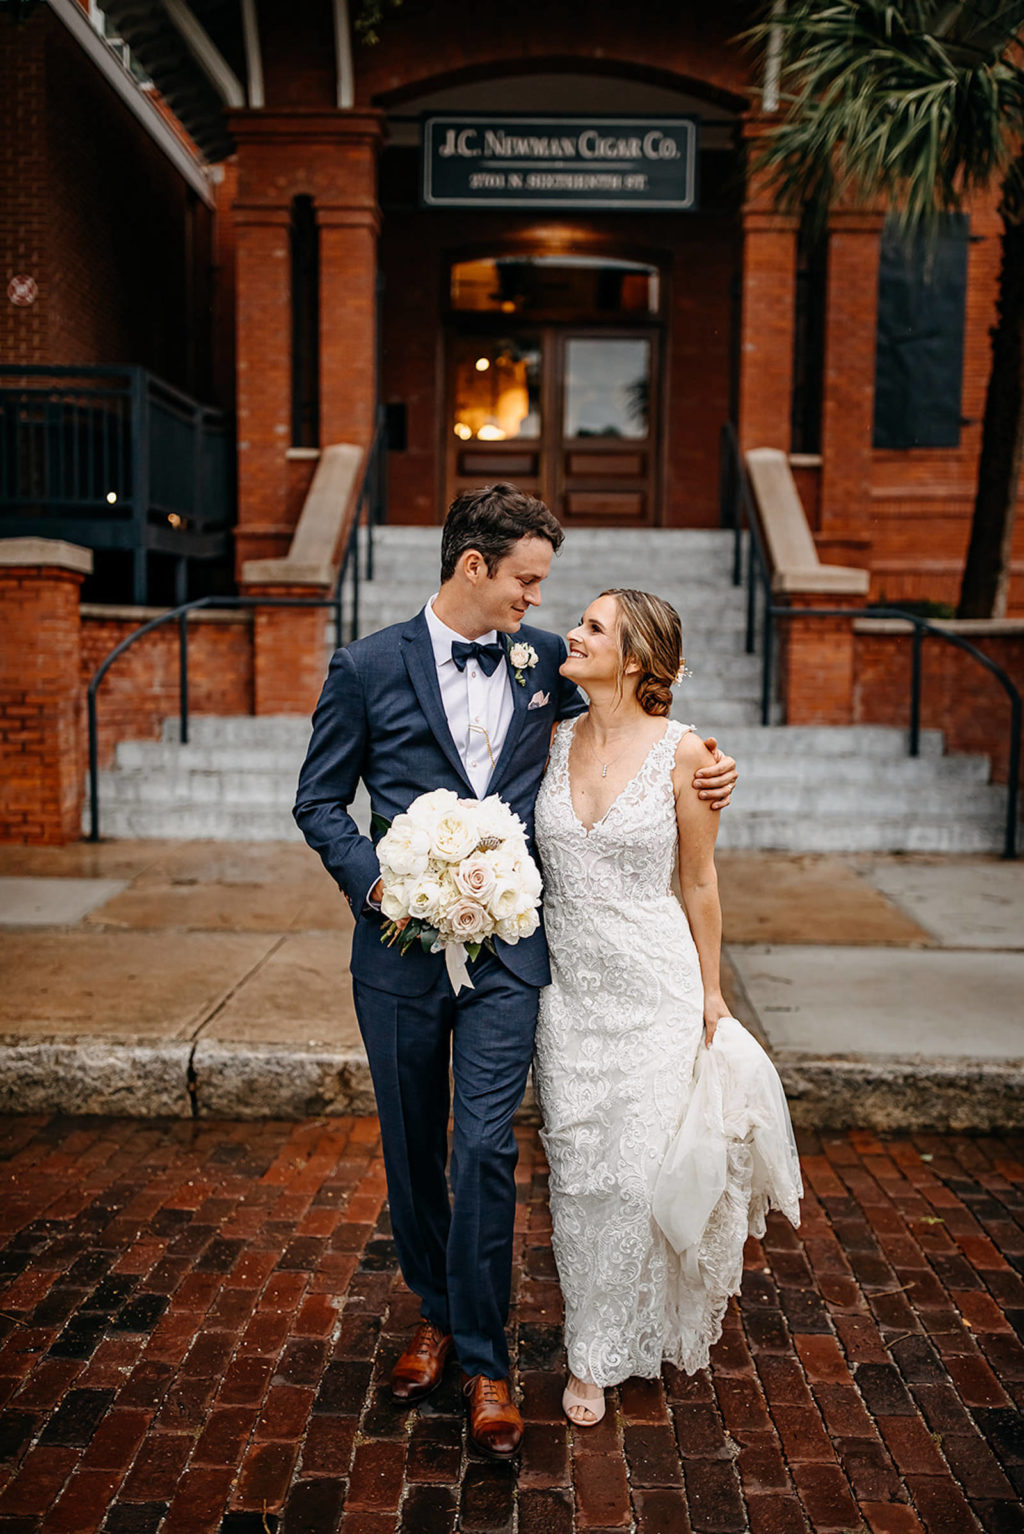 Tampa Bay Bride and Groom in front of Wedding Venue J.C. Newman Cigar Co. in Ybor City, Tampa